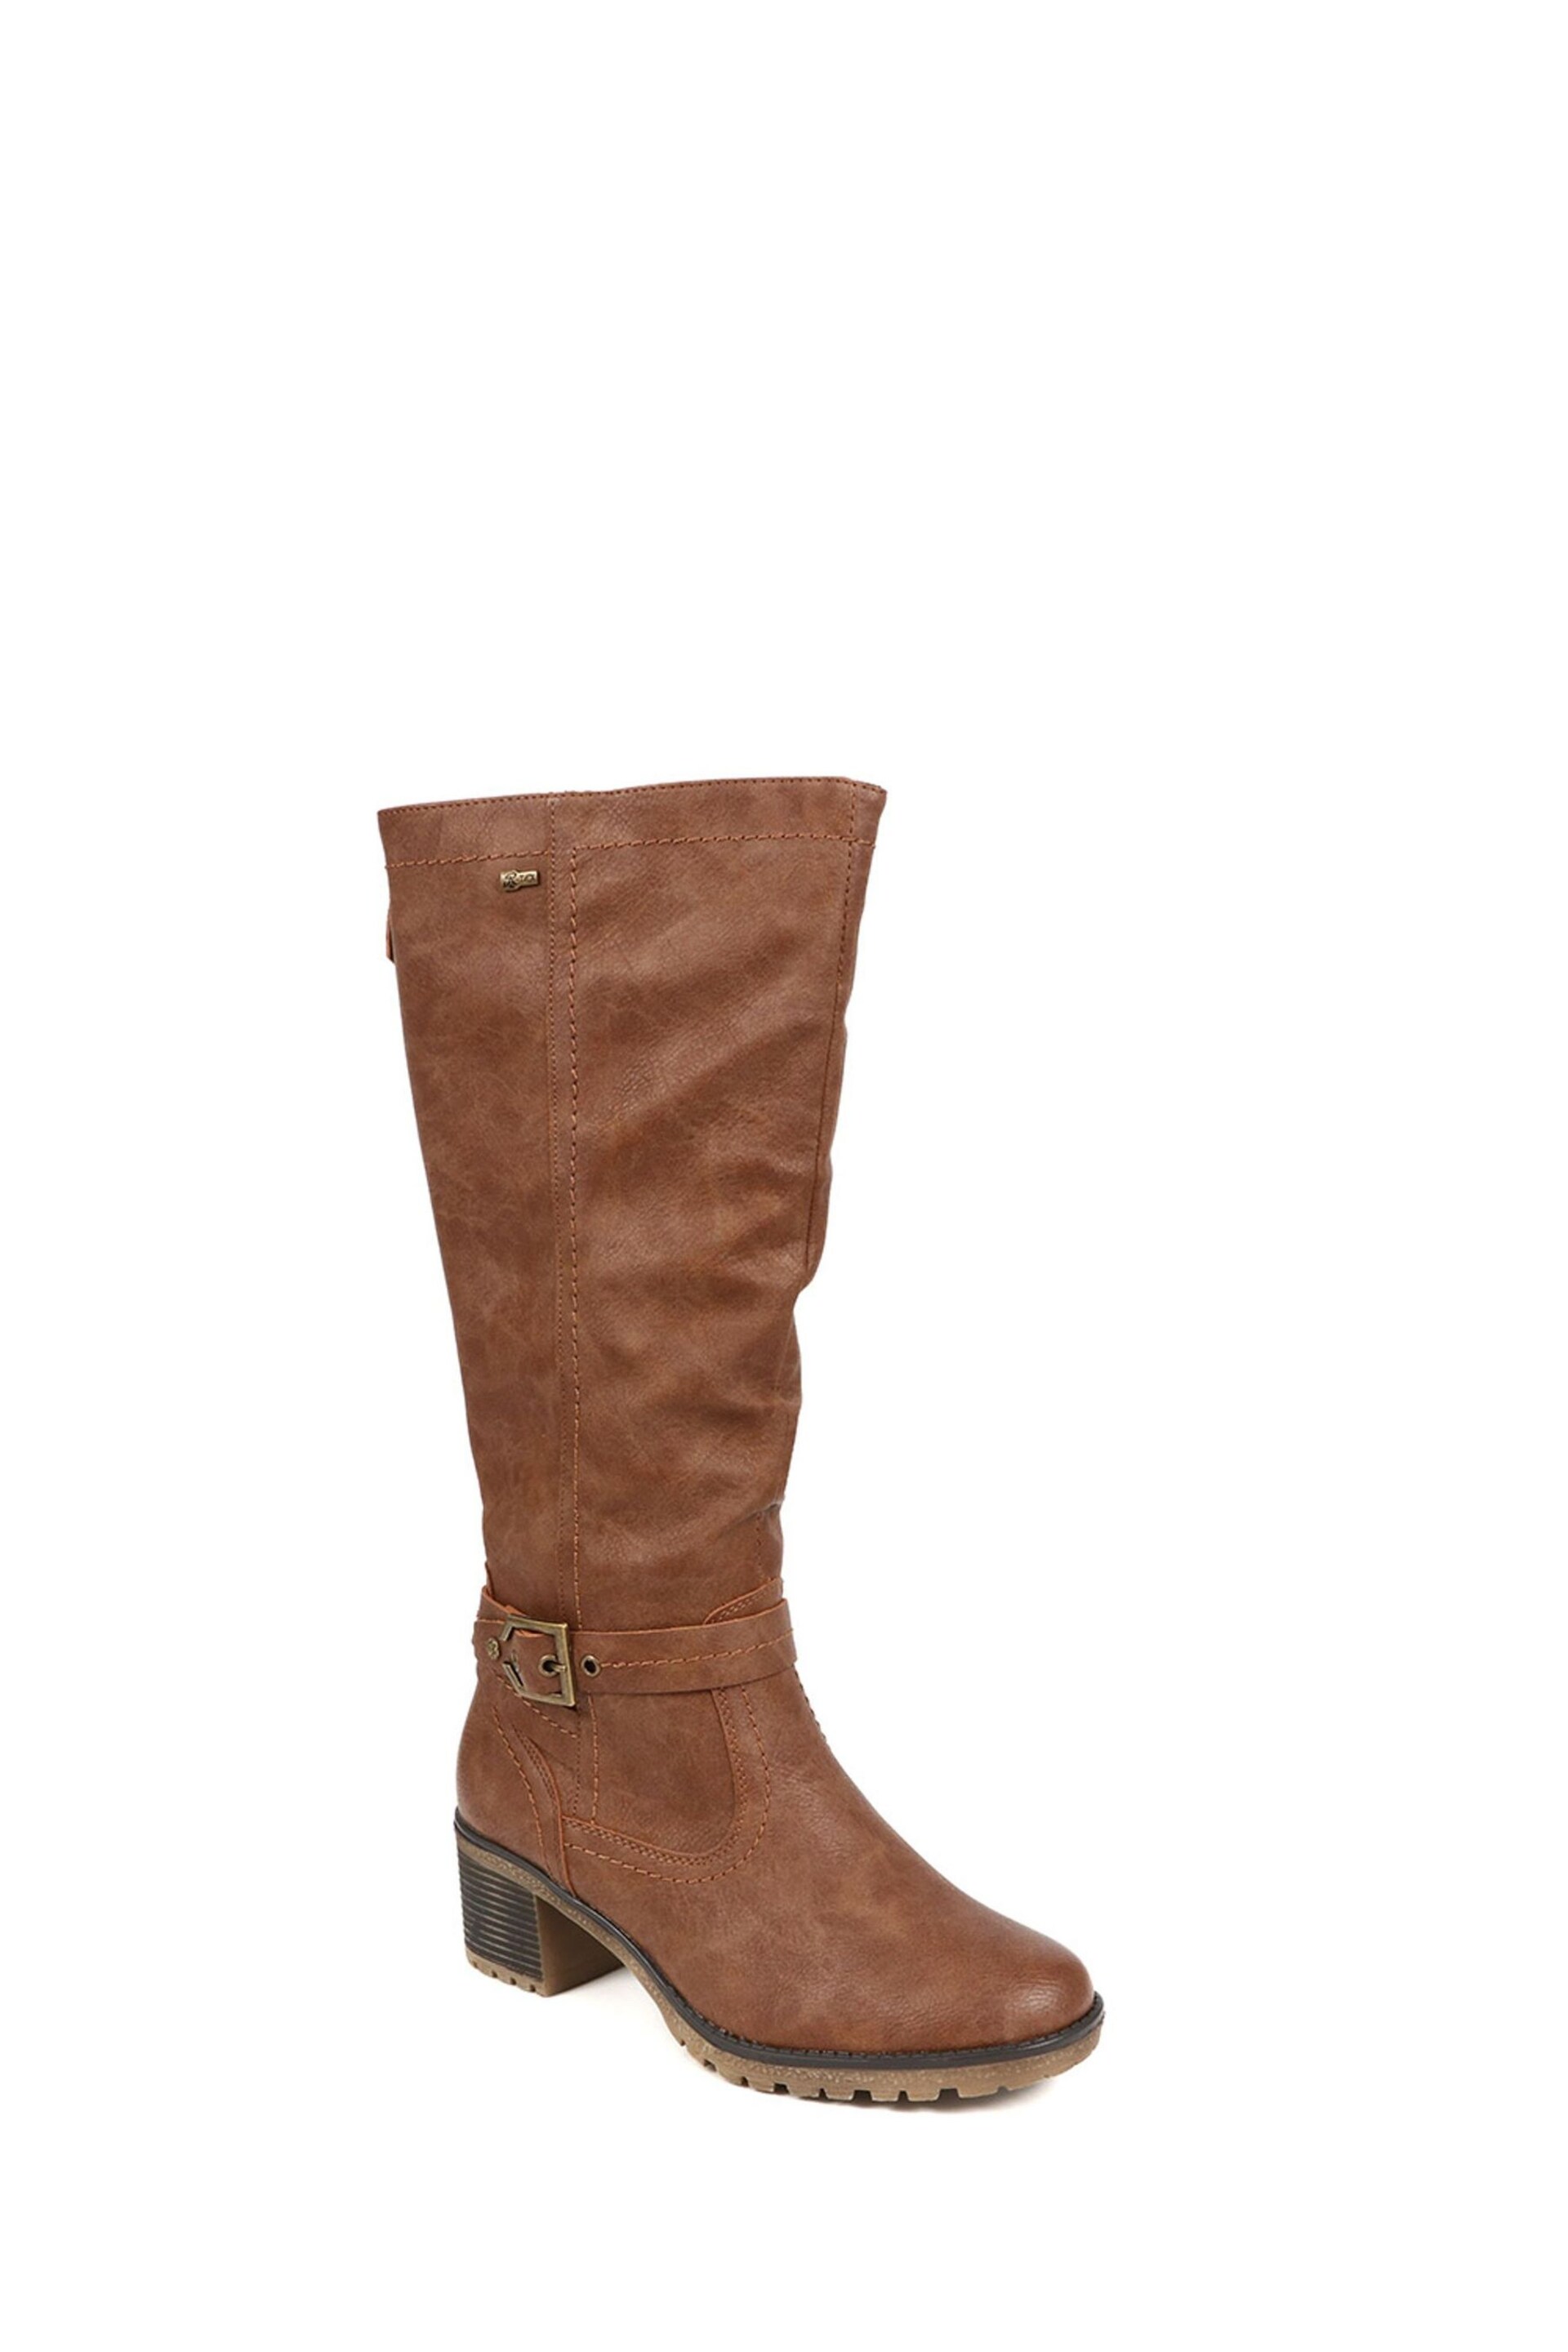 Pavers Heeled Riding Boots - Image 2 of 5